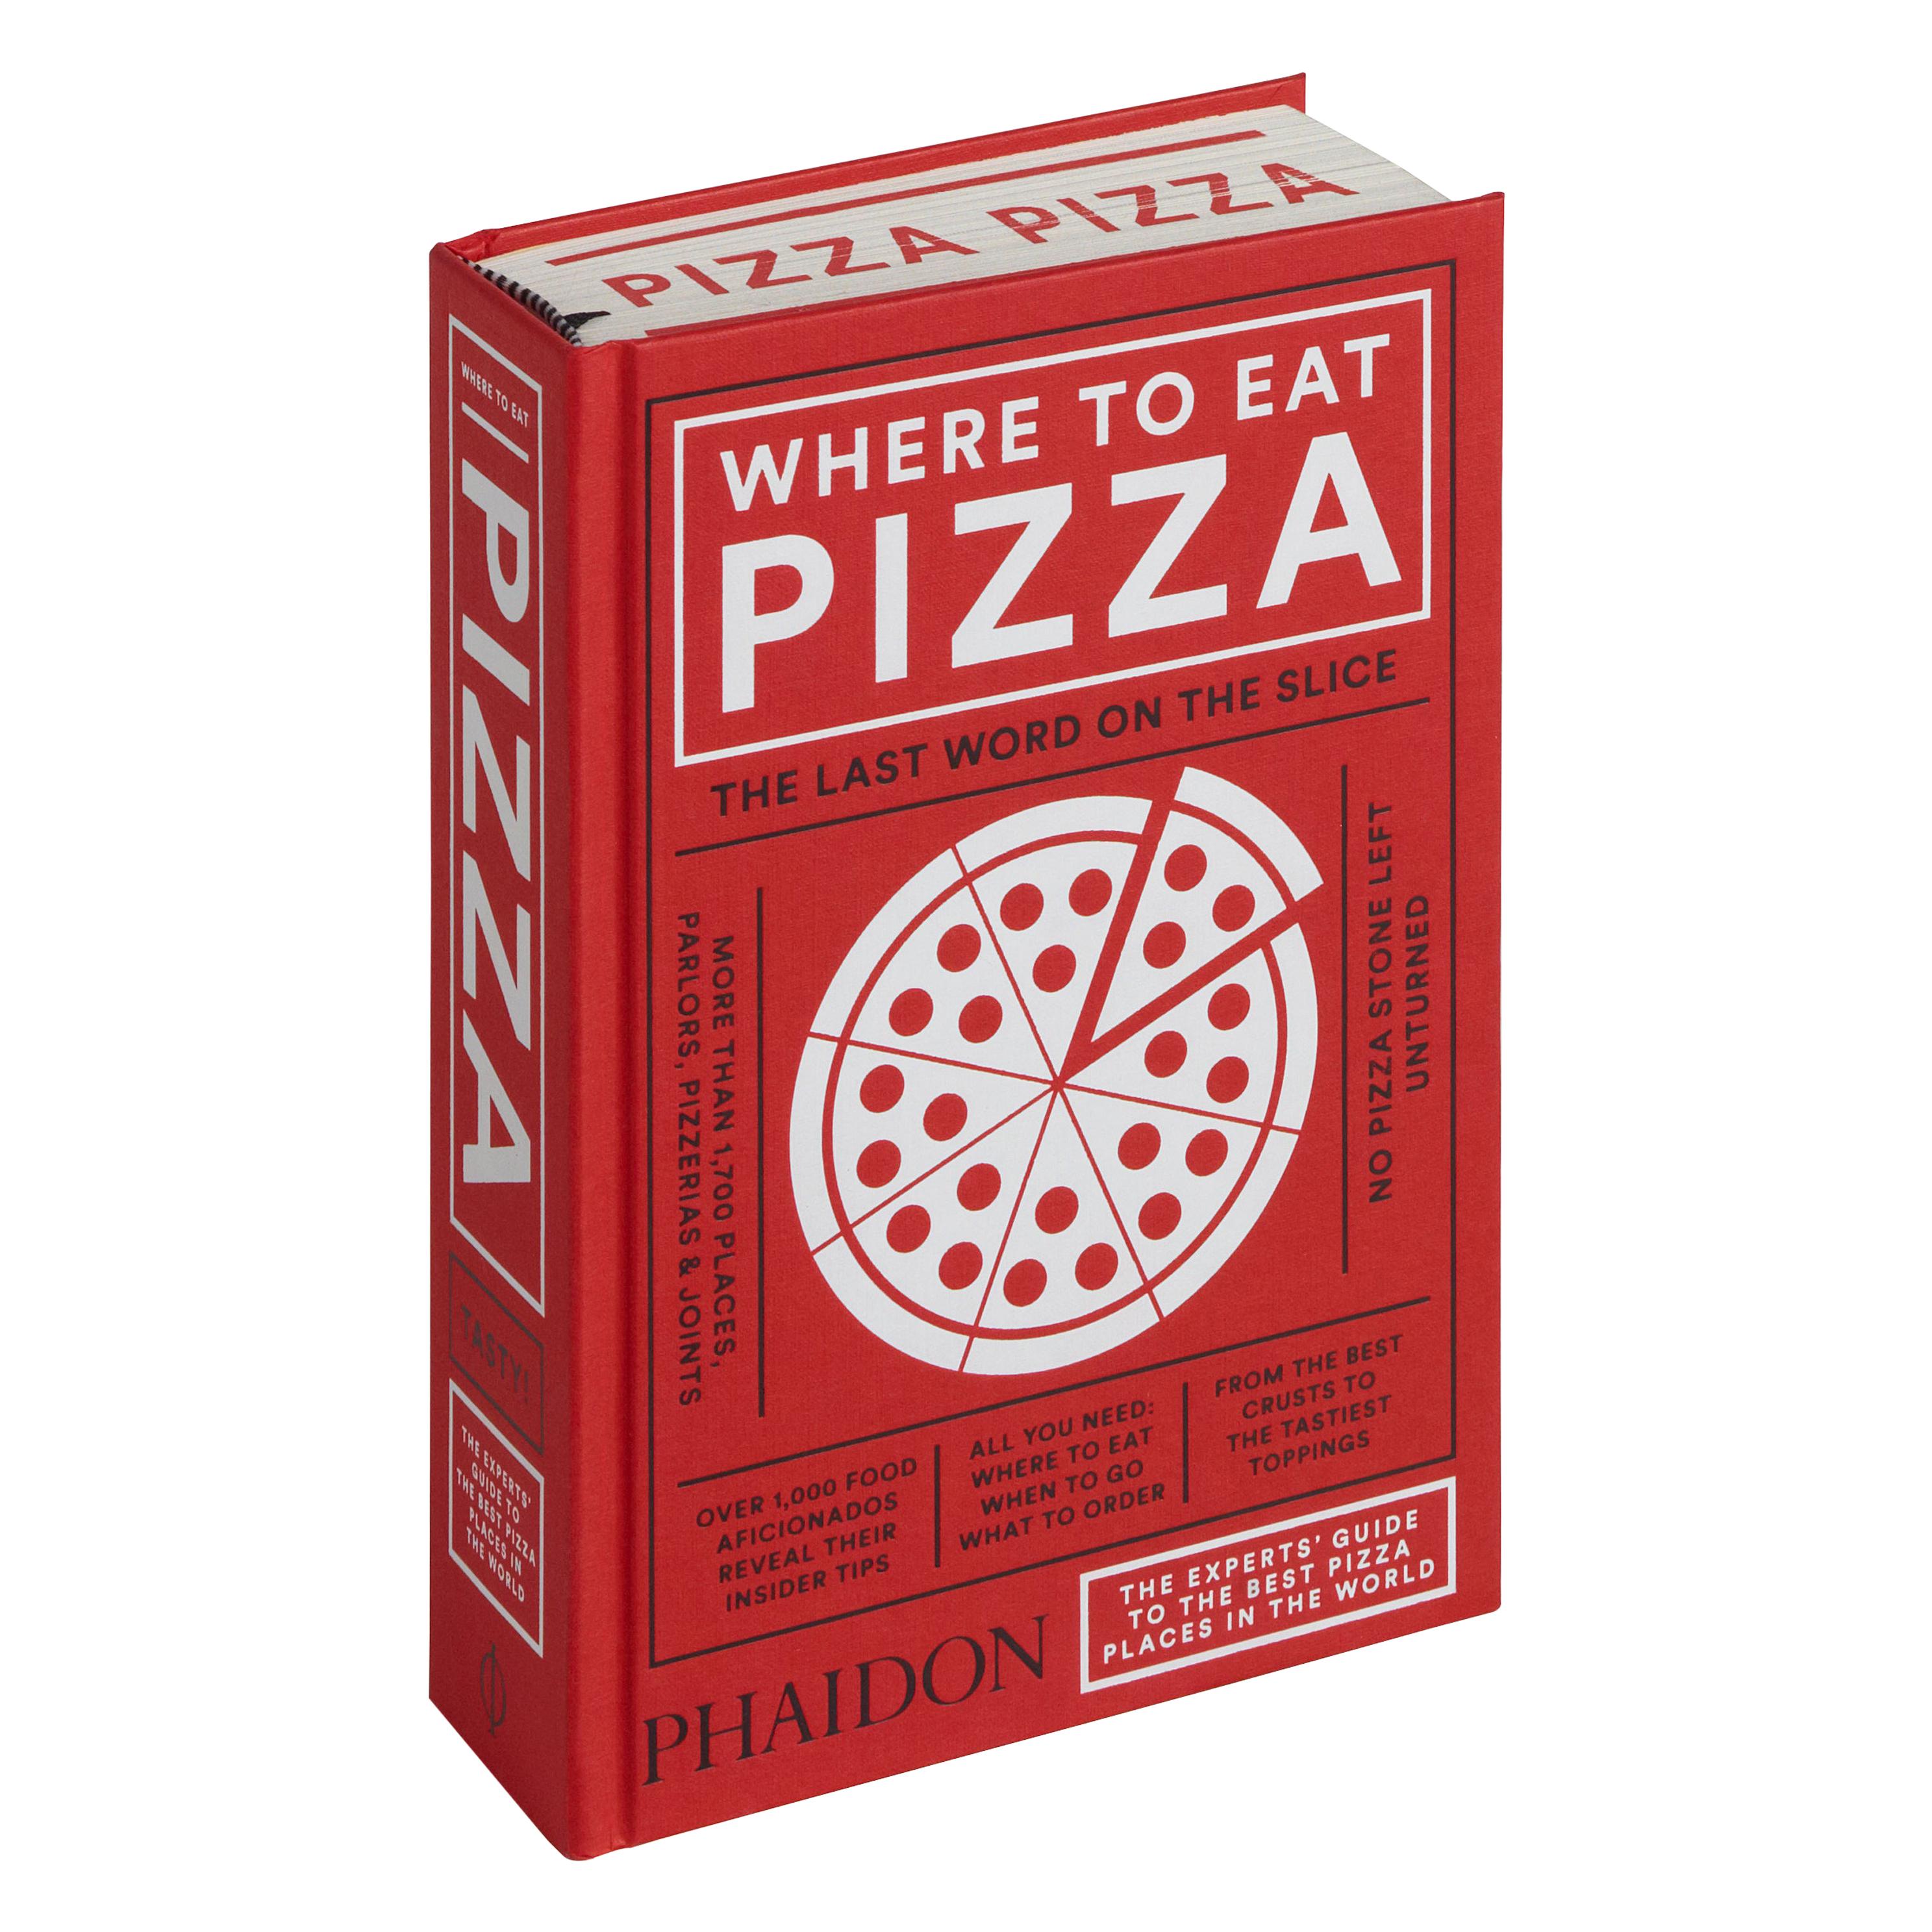 Where to Eat Pizza